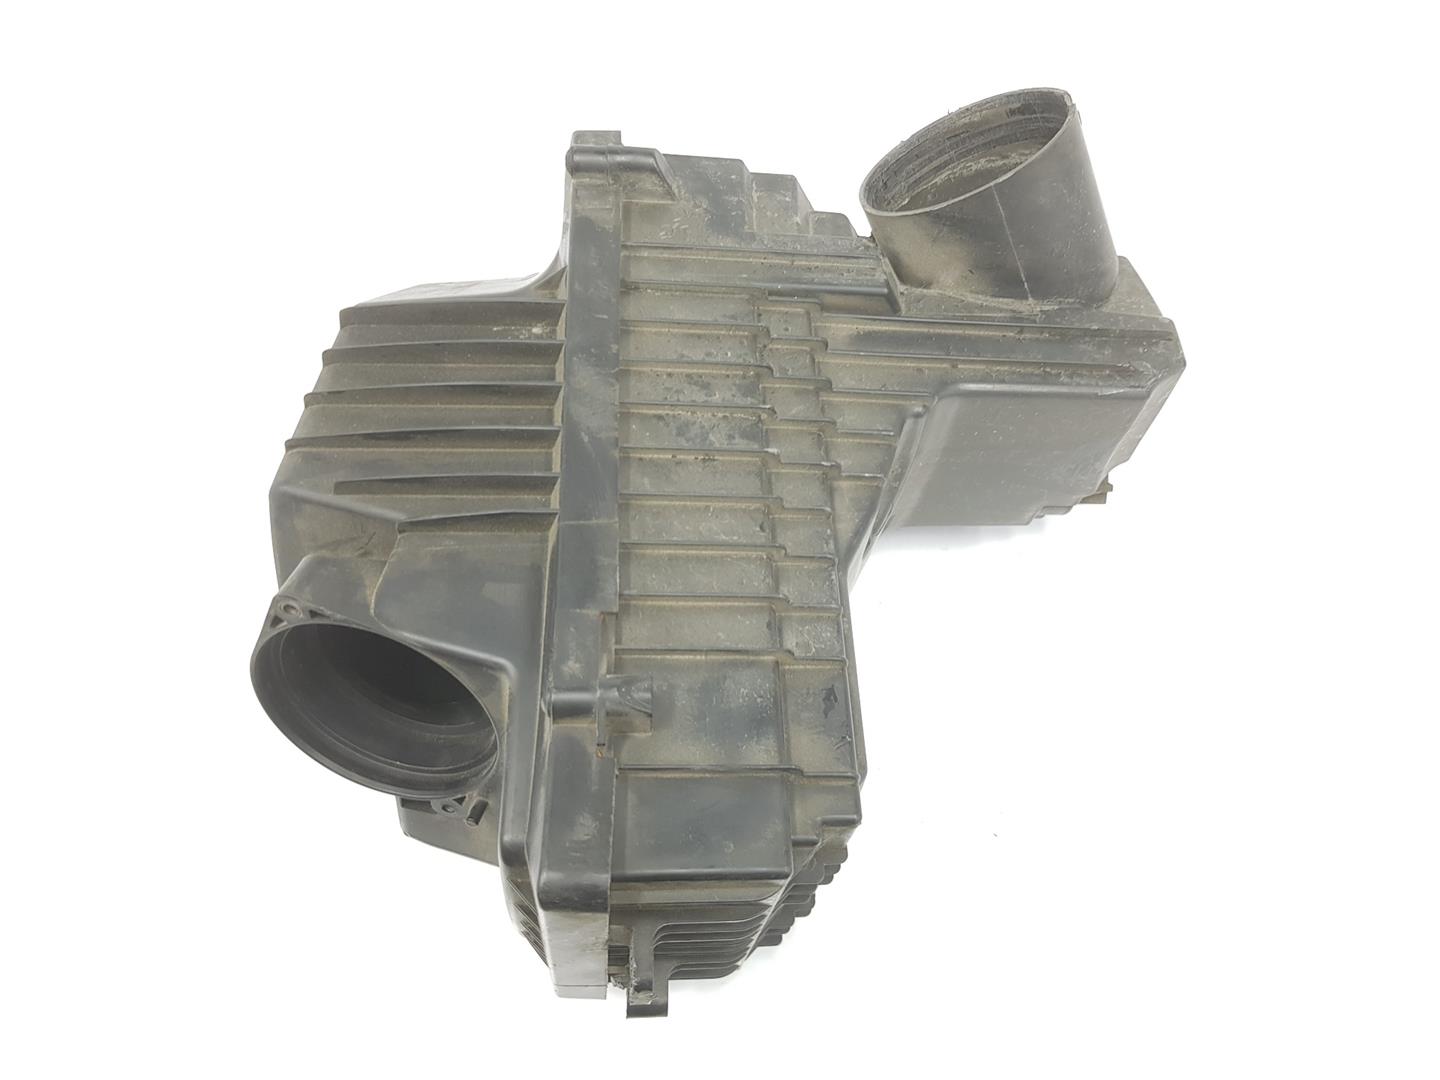 PEUGEOT 508 1 generation (2010-2020) Other Engine Compartment Parts 1427K4, 9644910780 24154750